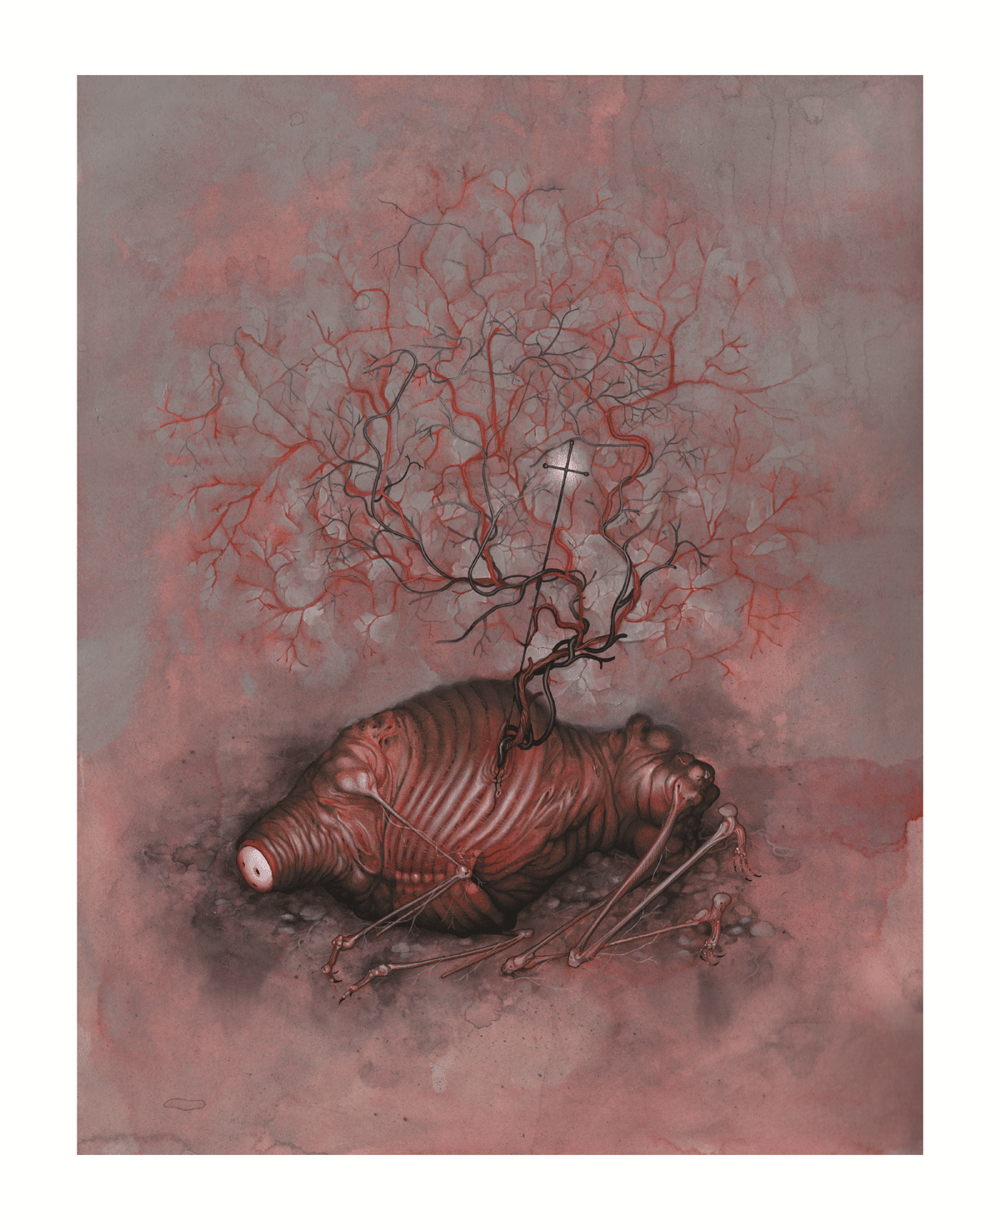 "Fruit of the Poisonous Tree" by Allison Sommers